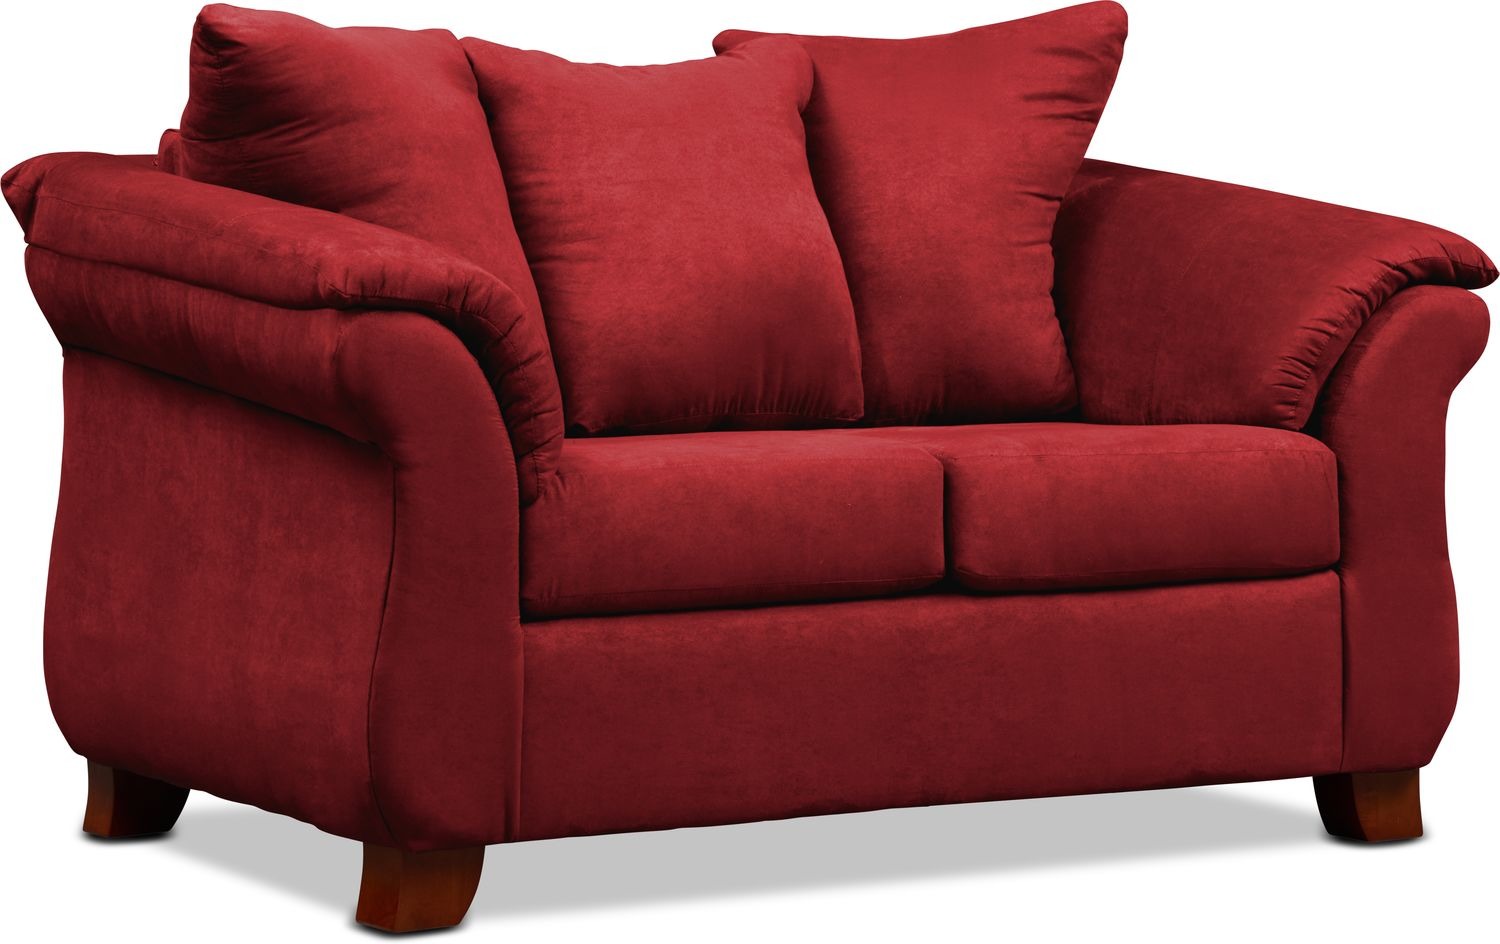 Adrian Loveseat | Value City Furniture and Mattresses